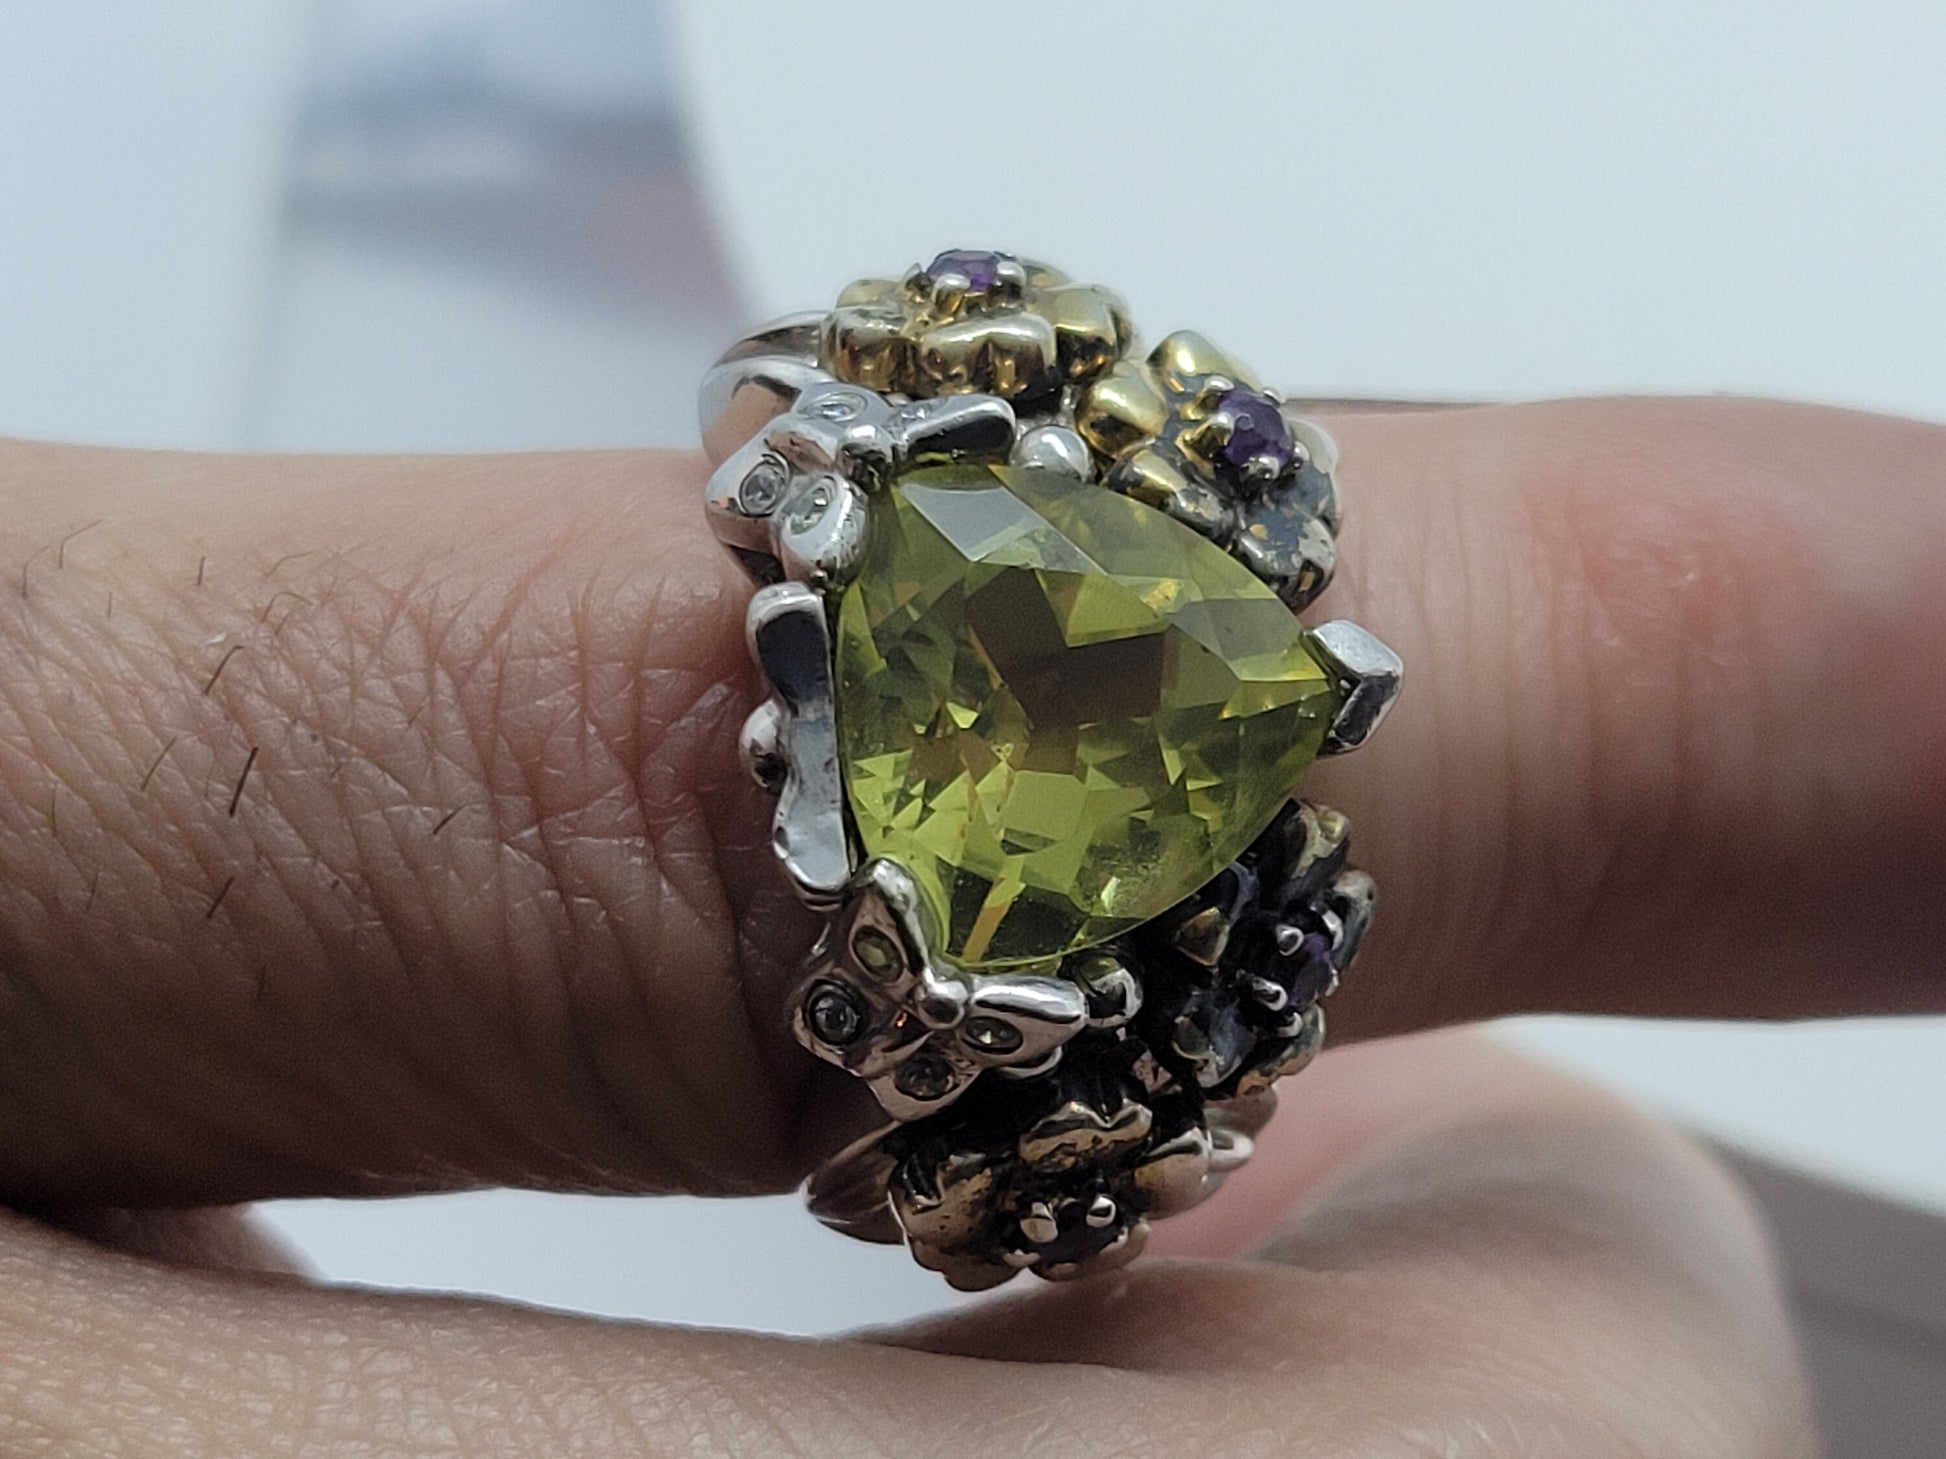 Vintage Yellow Quartz and Amethyst Ring in 925 Sterling Silver with 14k Accent and White Sapphires